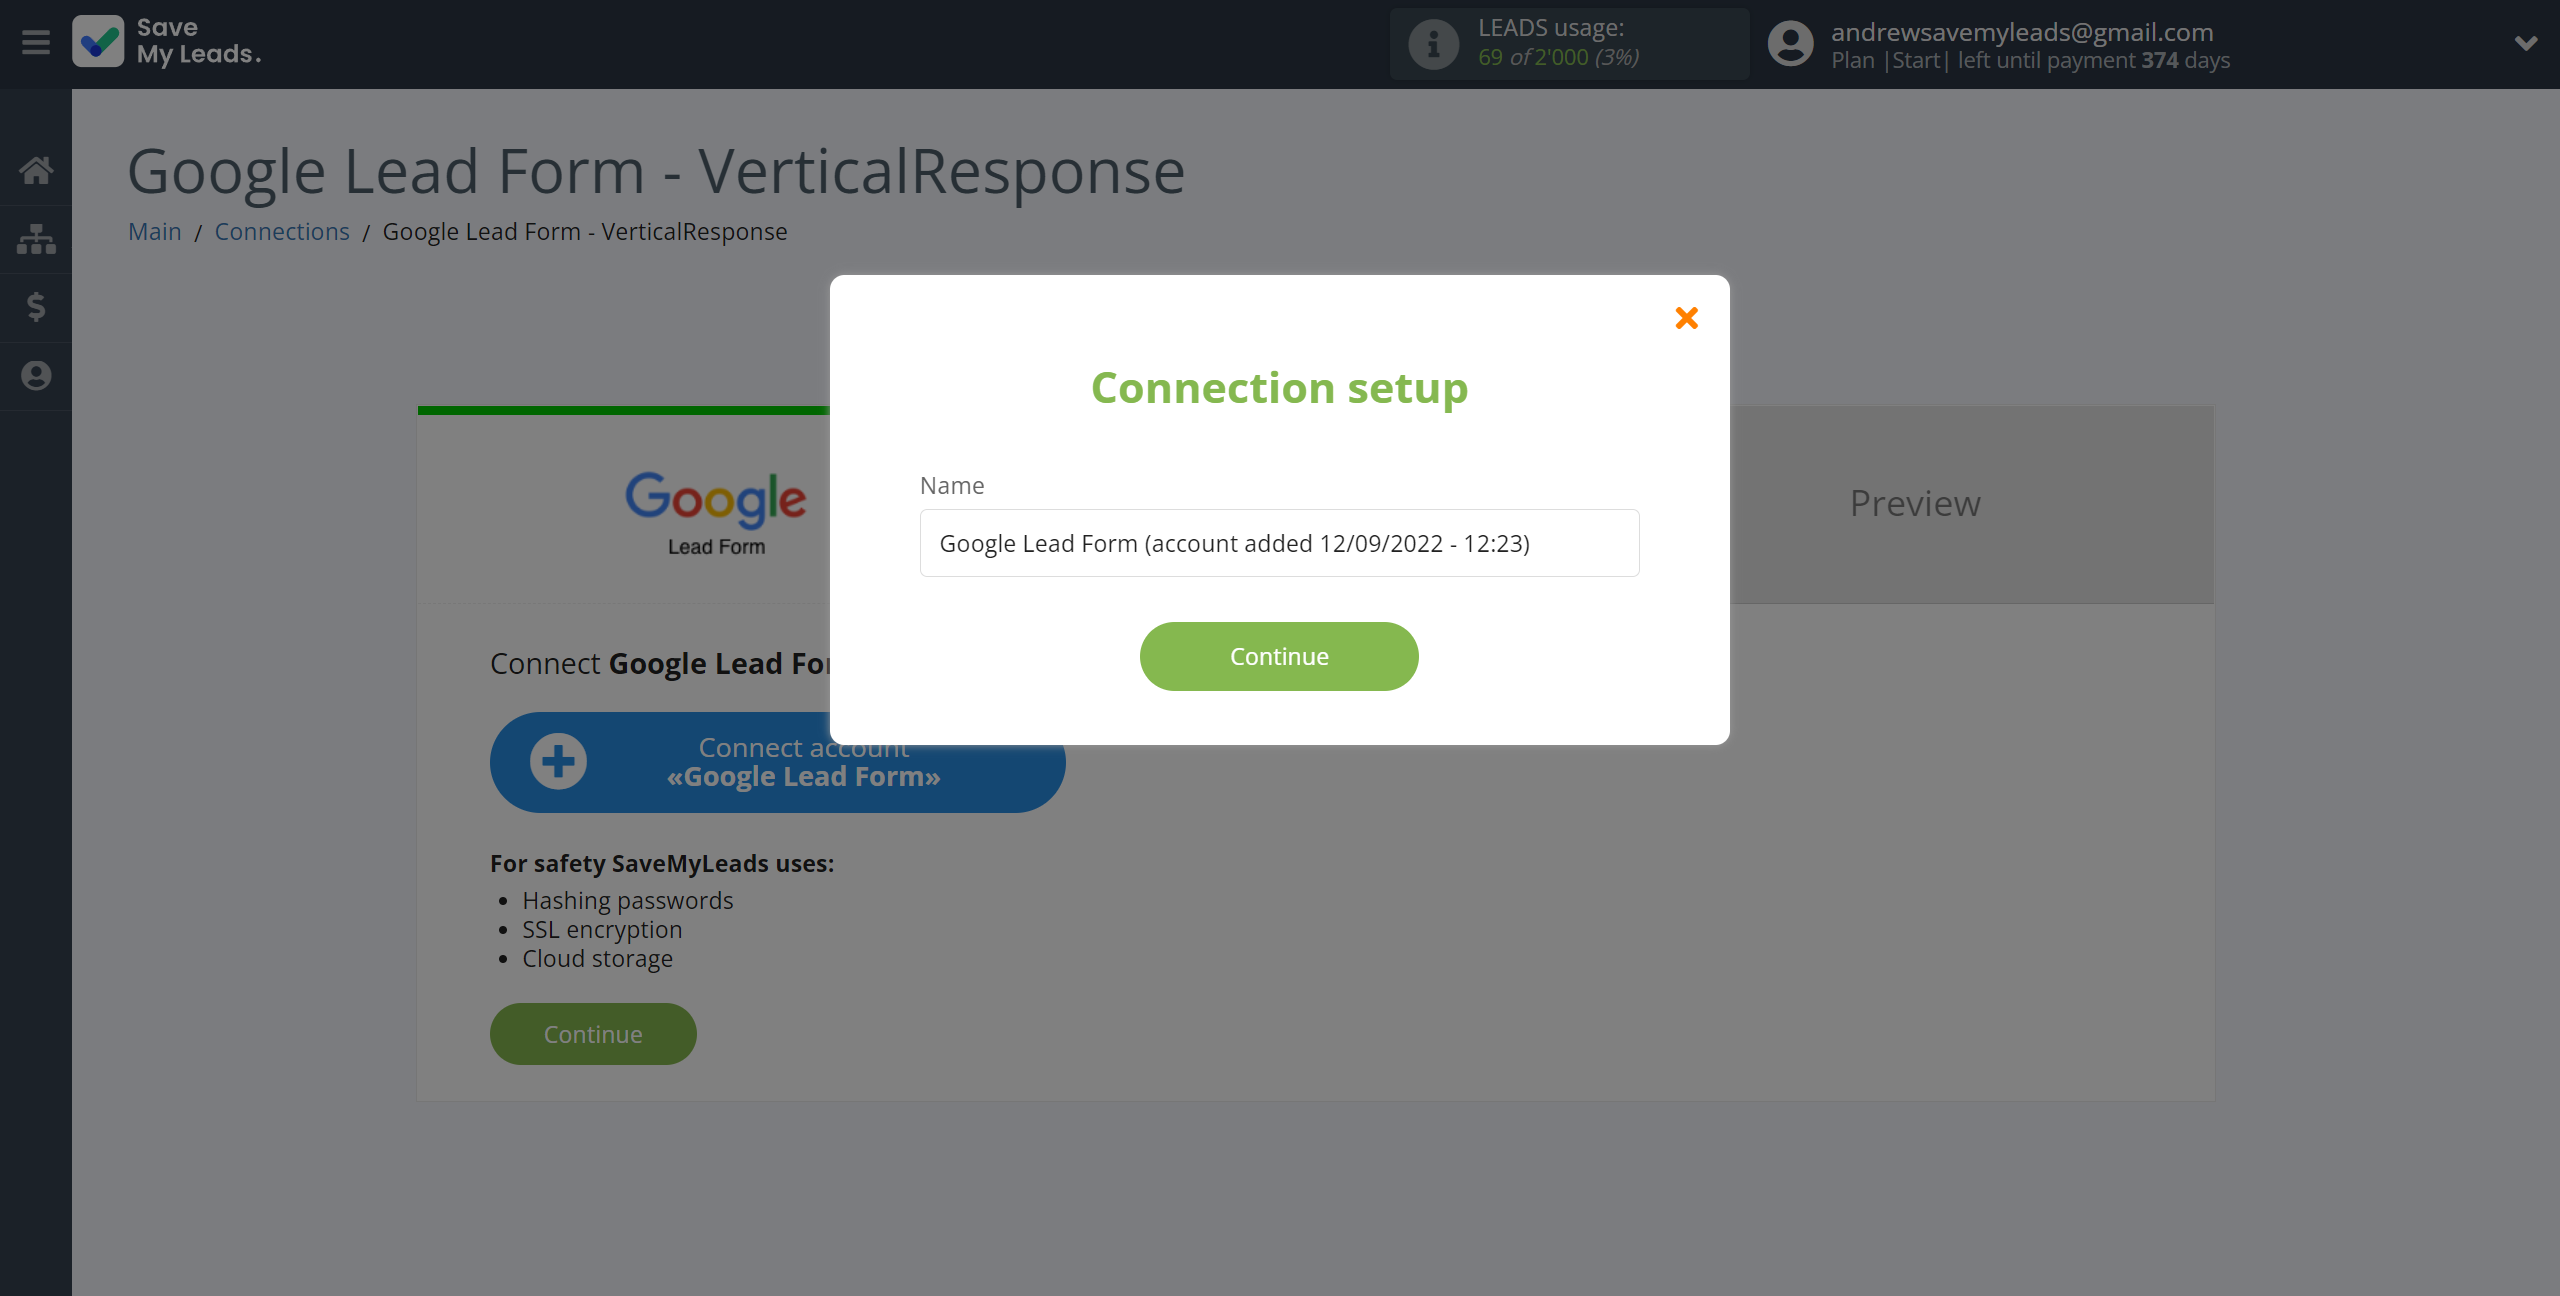 How to Connect Google Lead Form with VerticalResponse | Data Source account connection